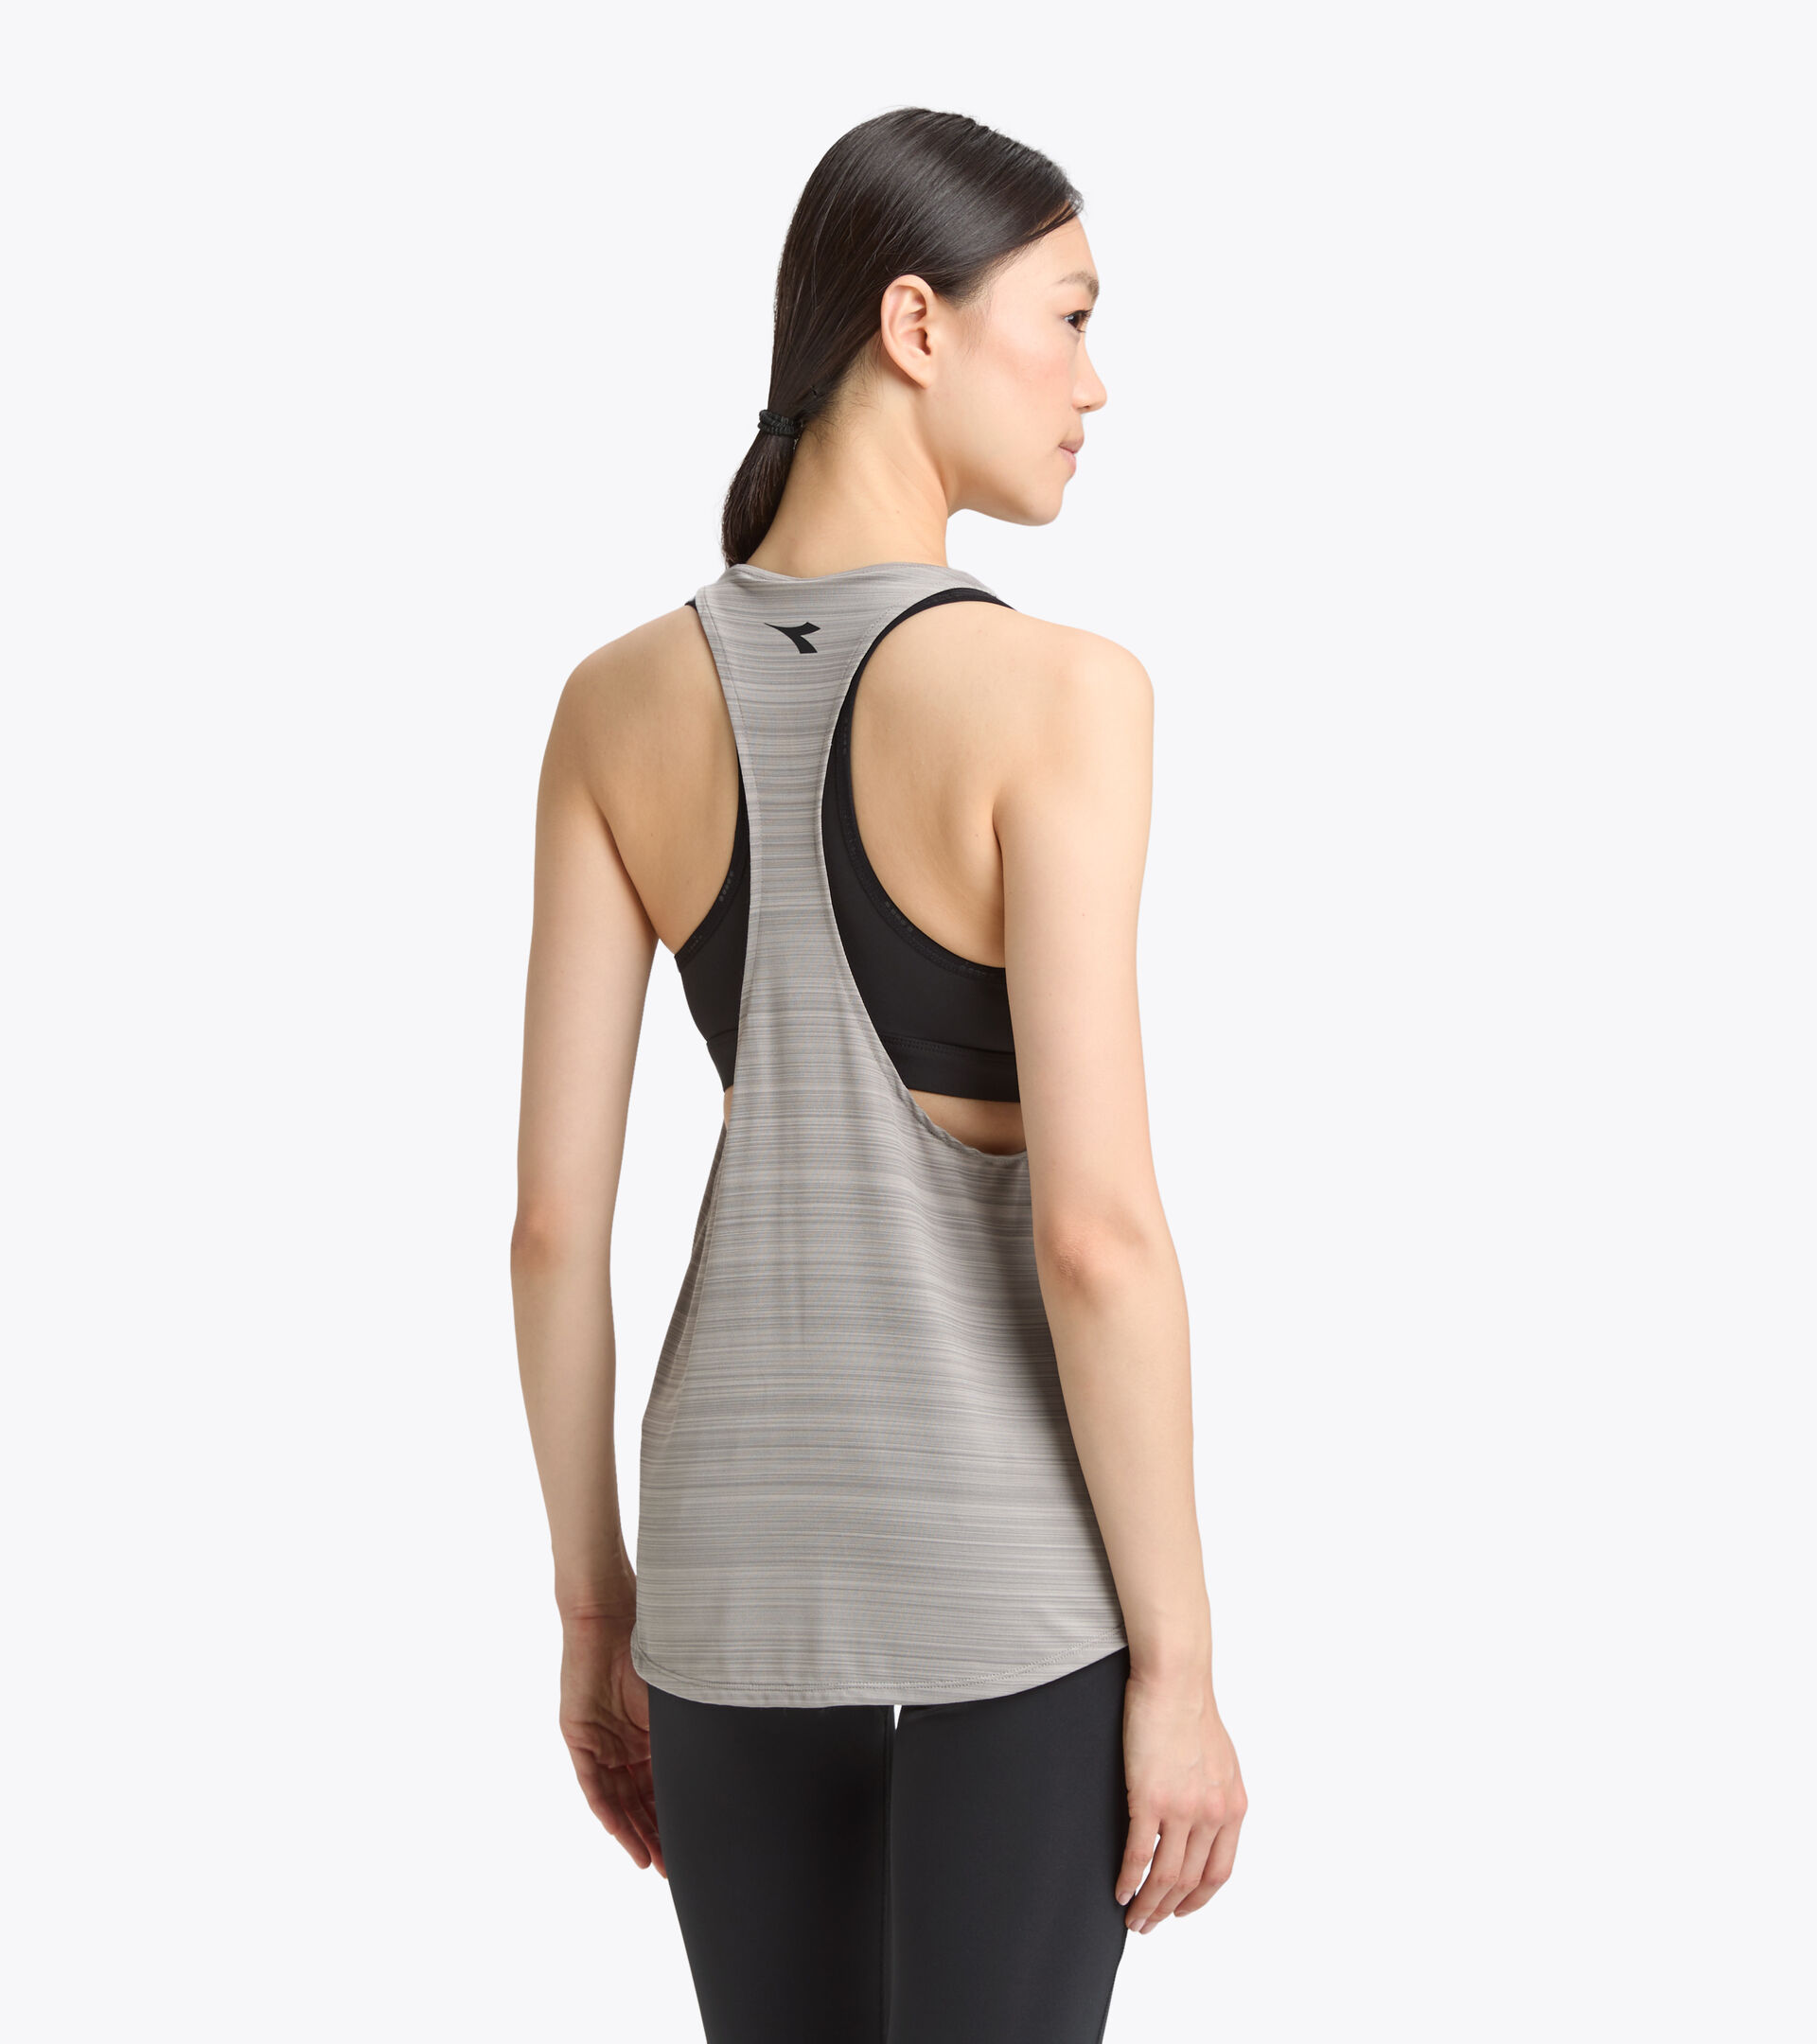 Training top and vest set - Women’s L. DOUBLE TANK BE ONE FT SILVER METALIZED - Diadora